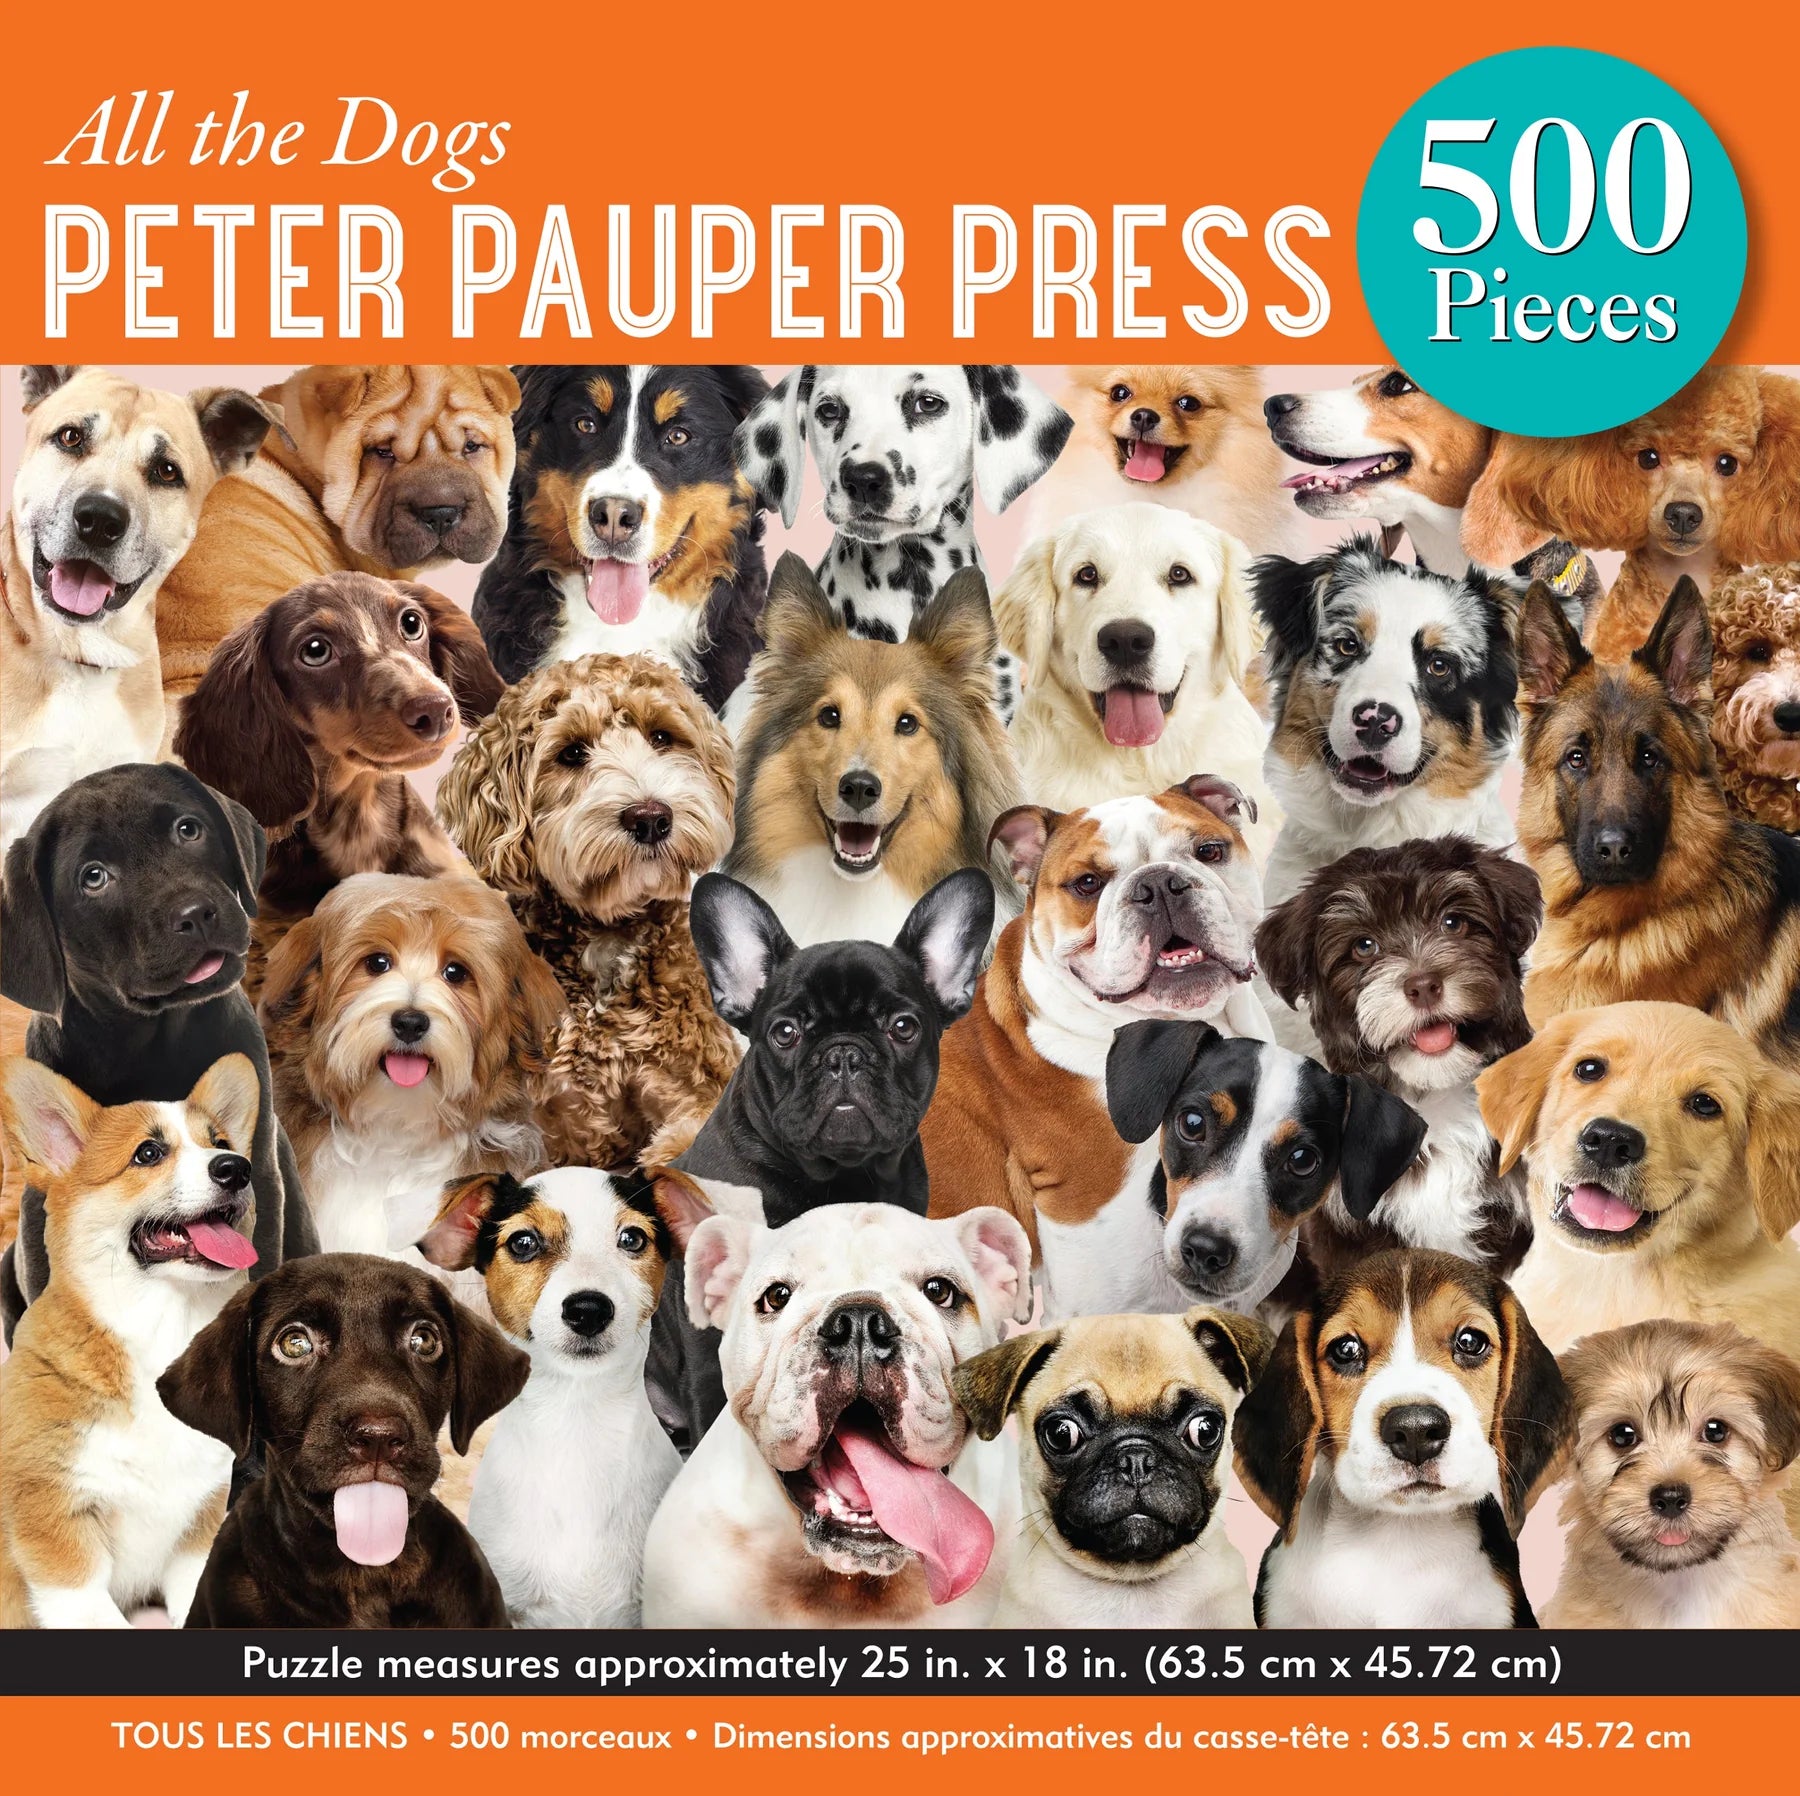 All the Dogs Puzzle (500 Pieces)